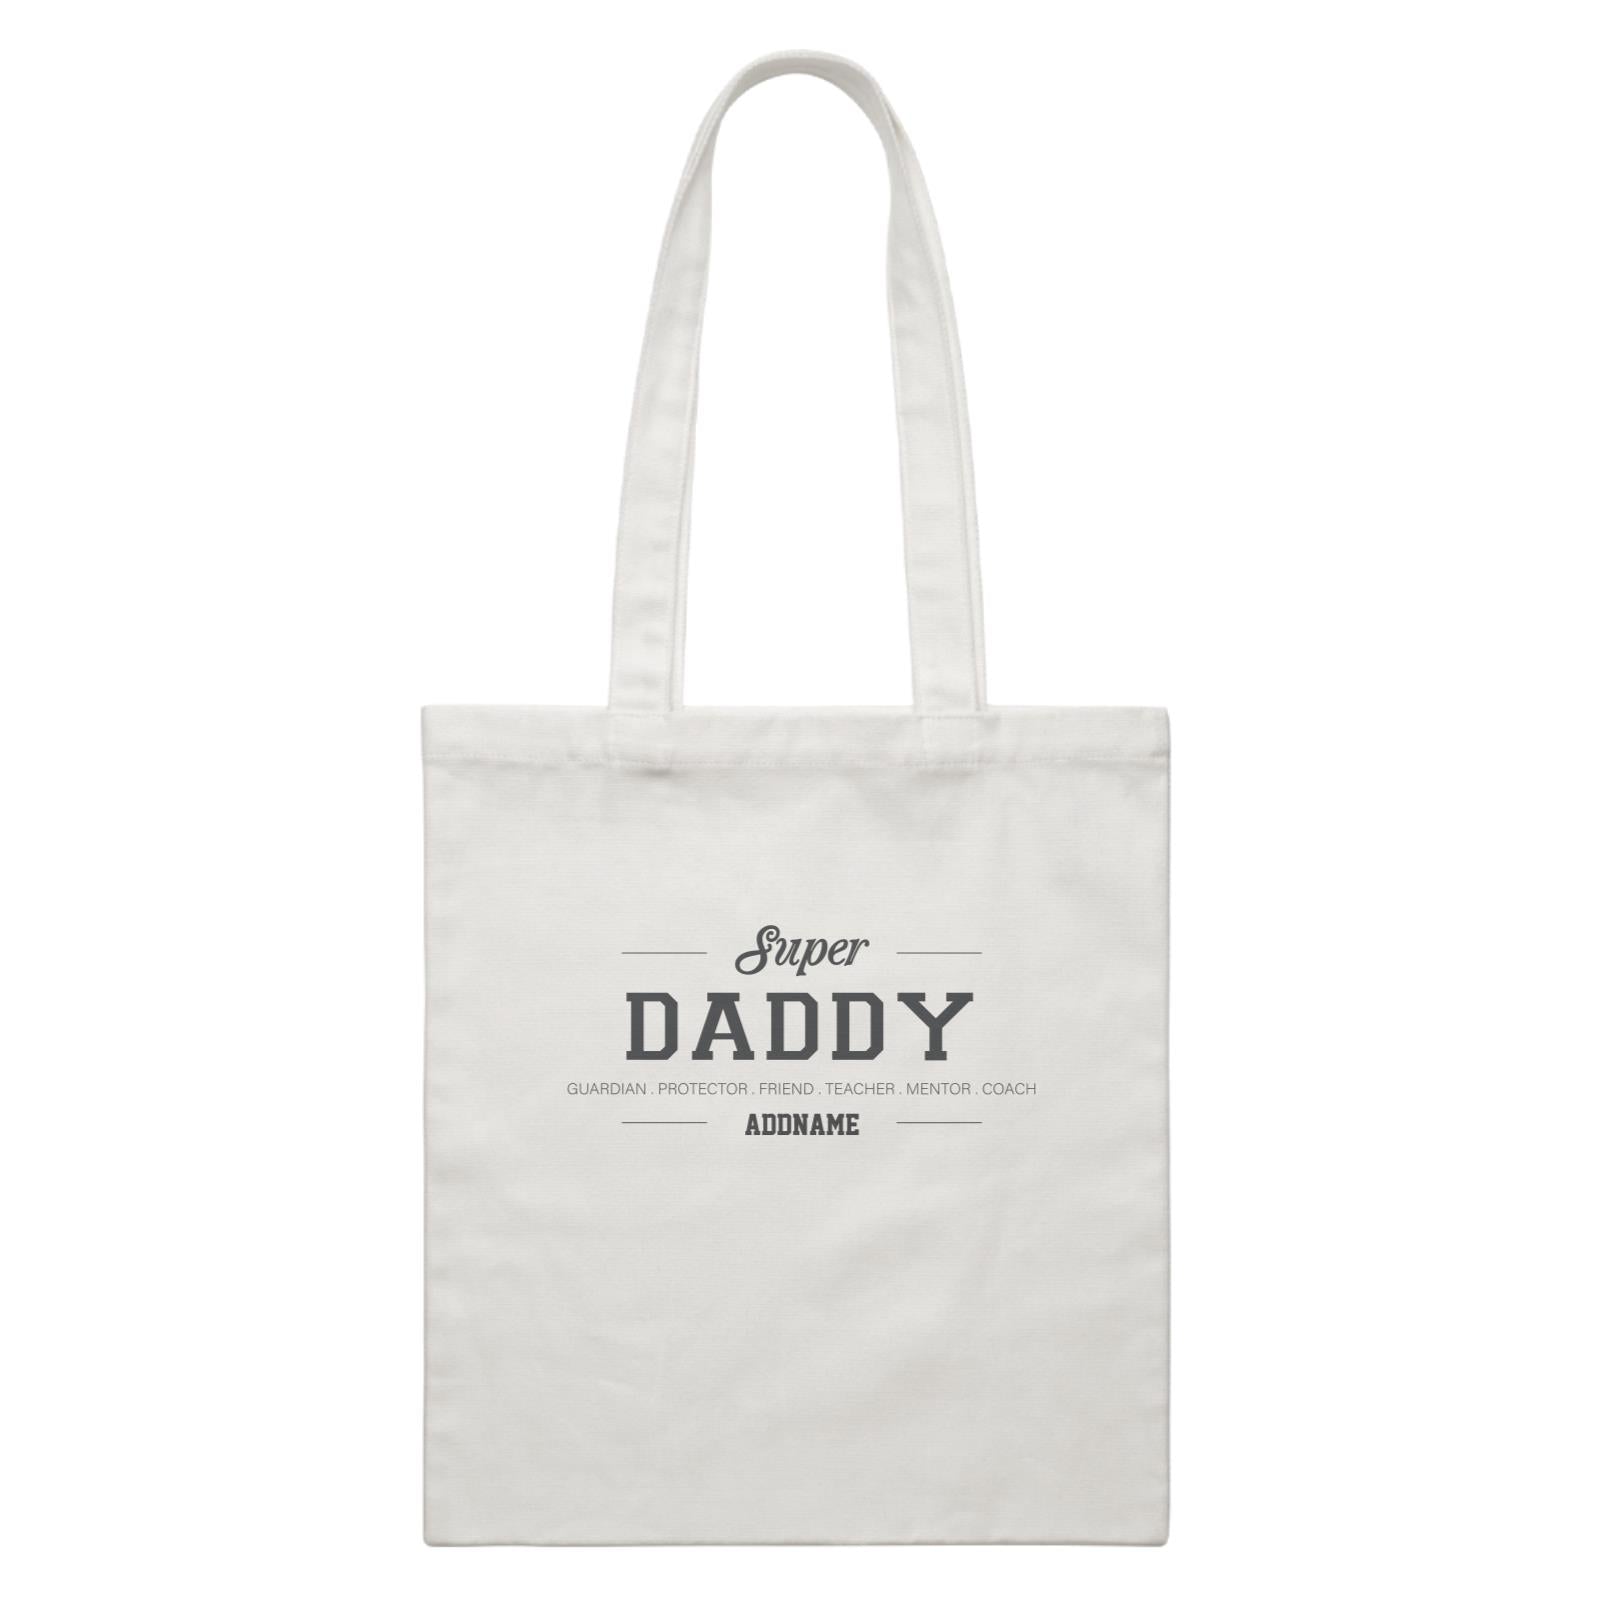 Super Definition Family Super Daddy Addname White Canvas Bag